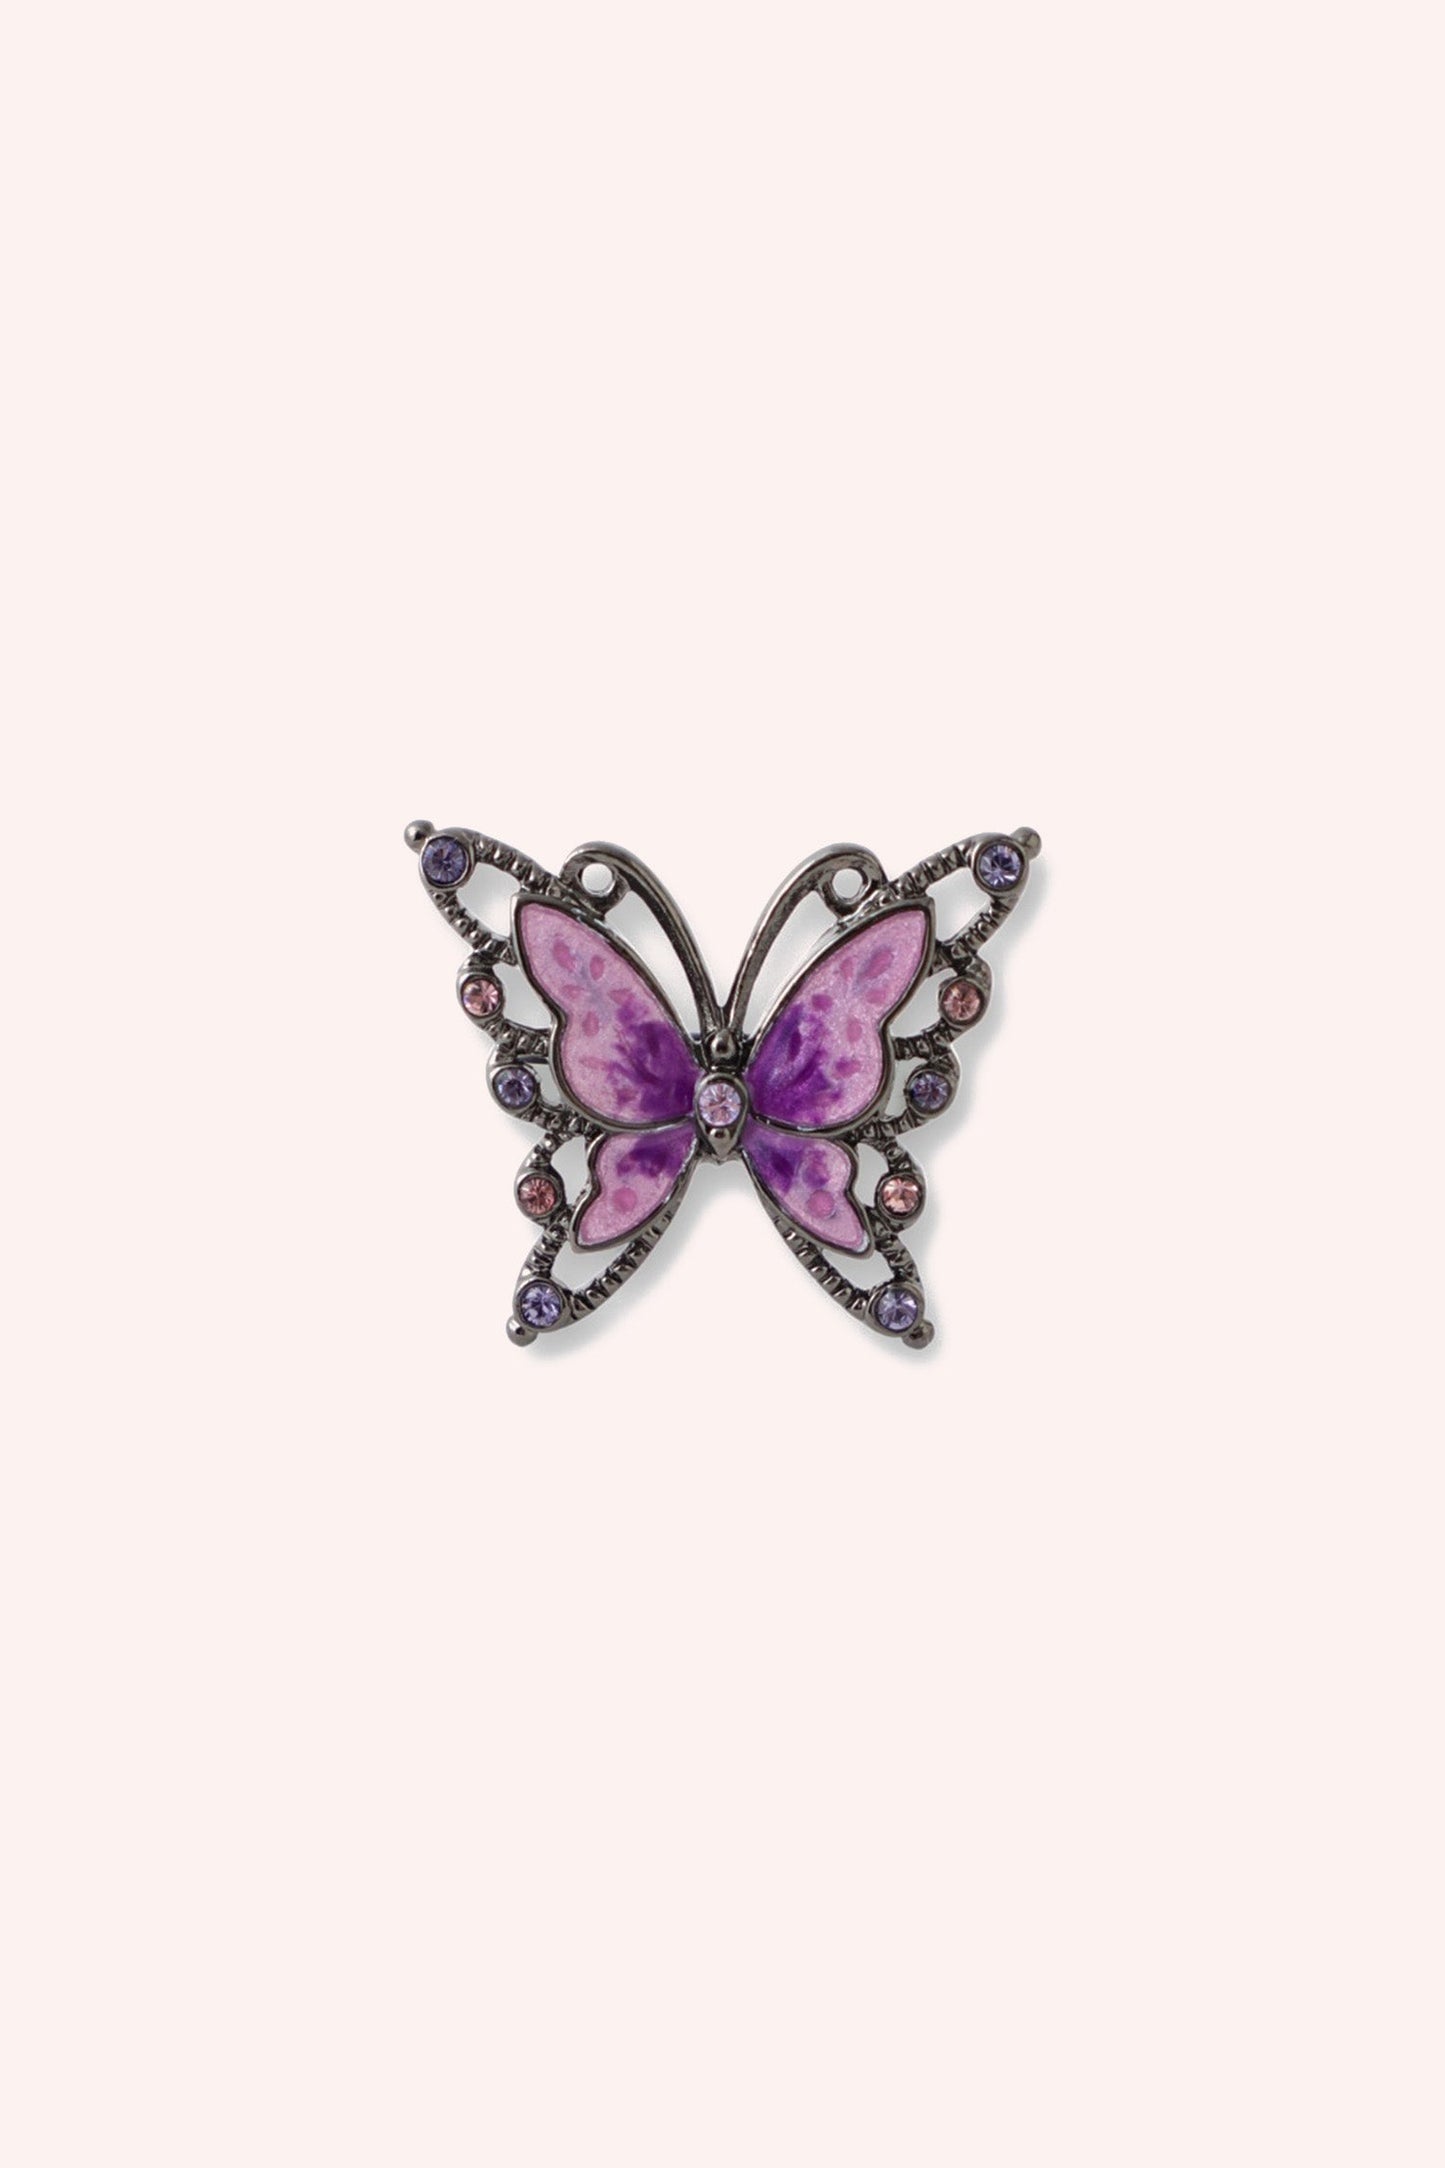 Butterfly Ring, 2 butterflies one on top of the other, a full purple and a hollow in gunmetal/gemstones